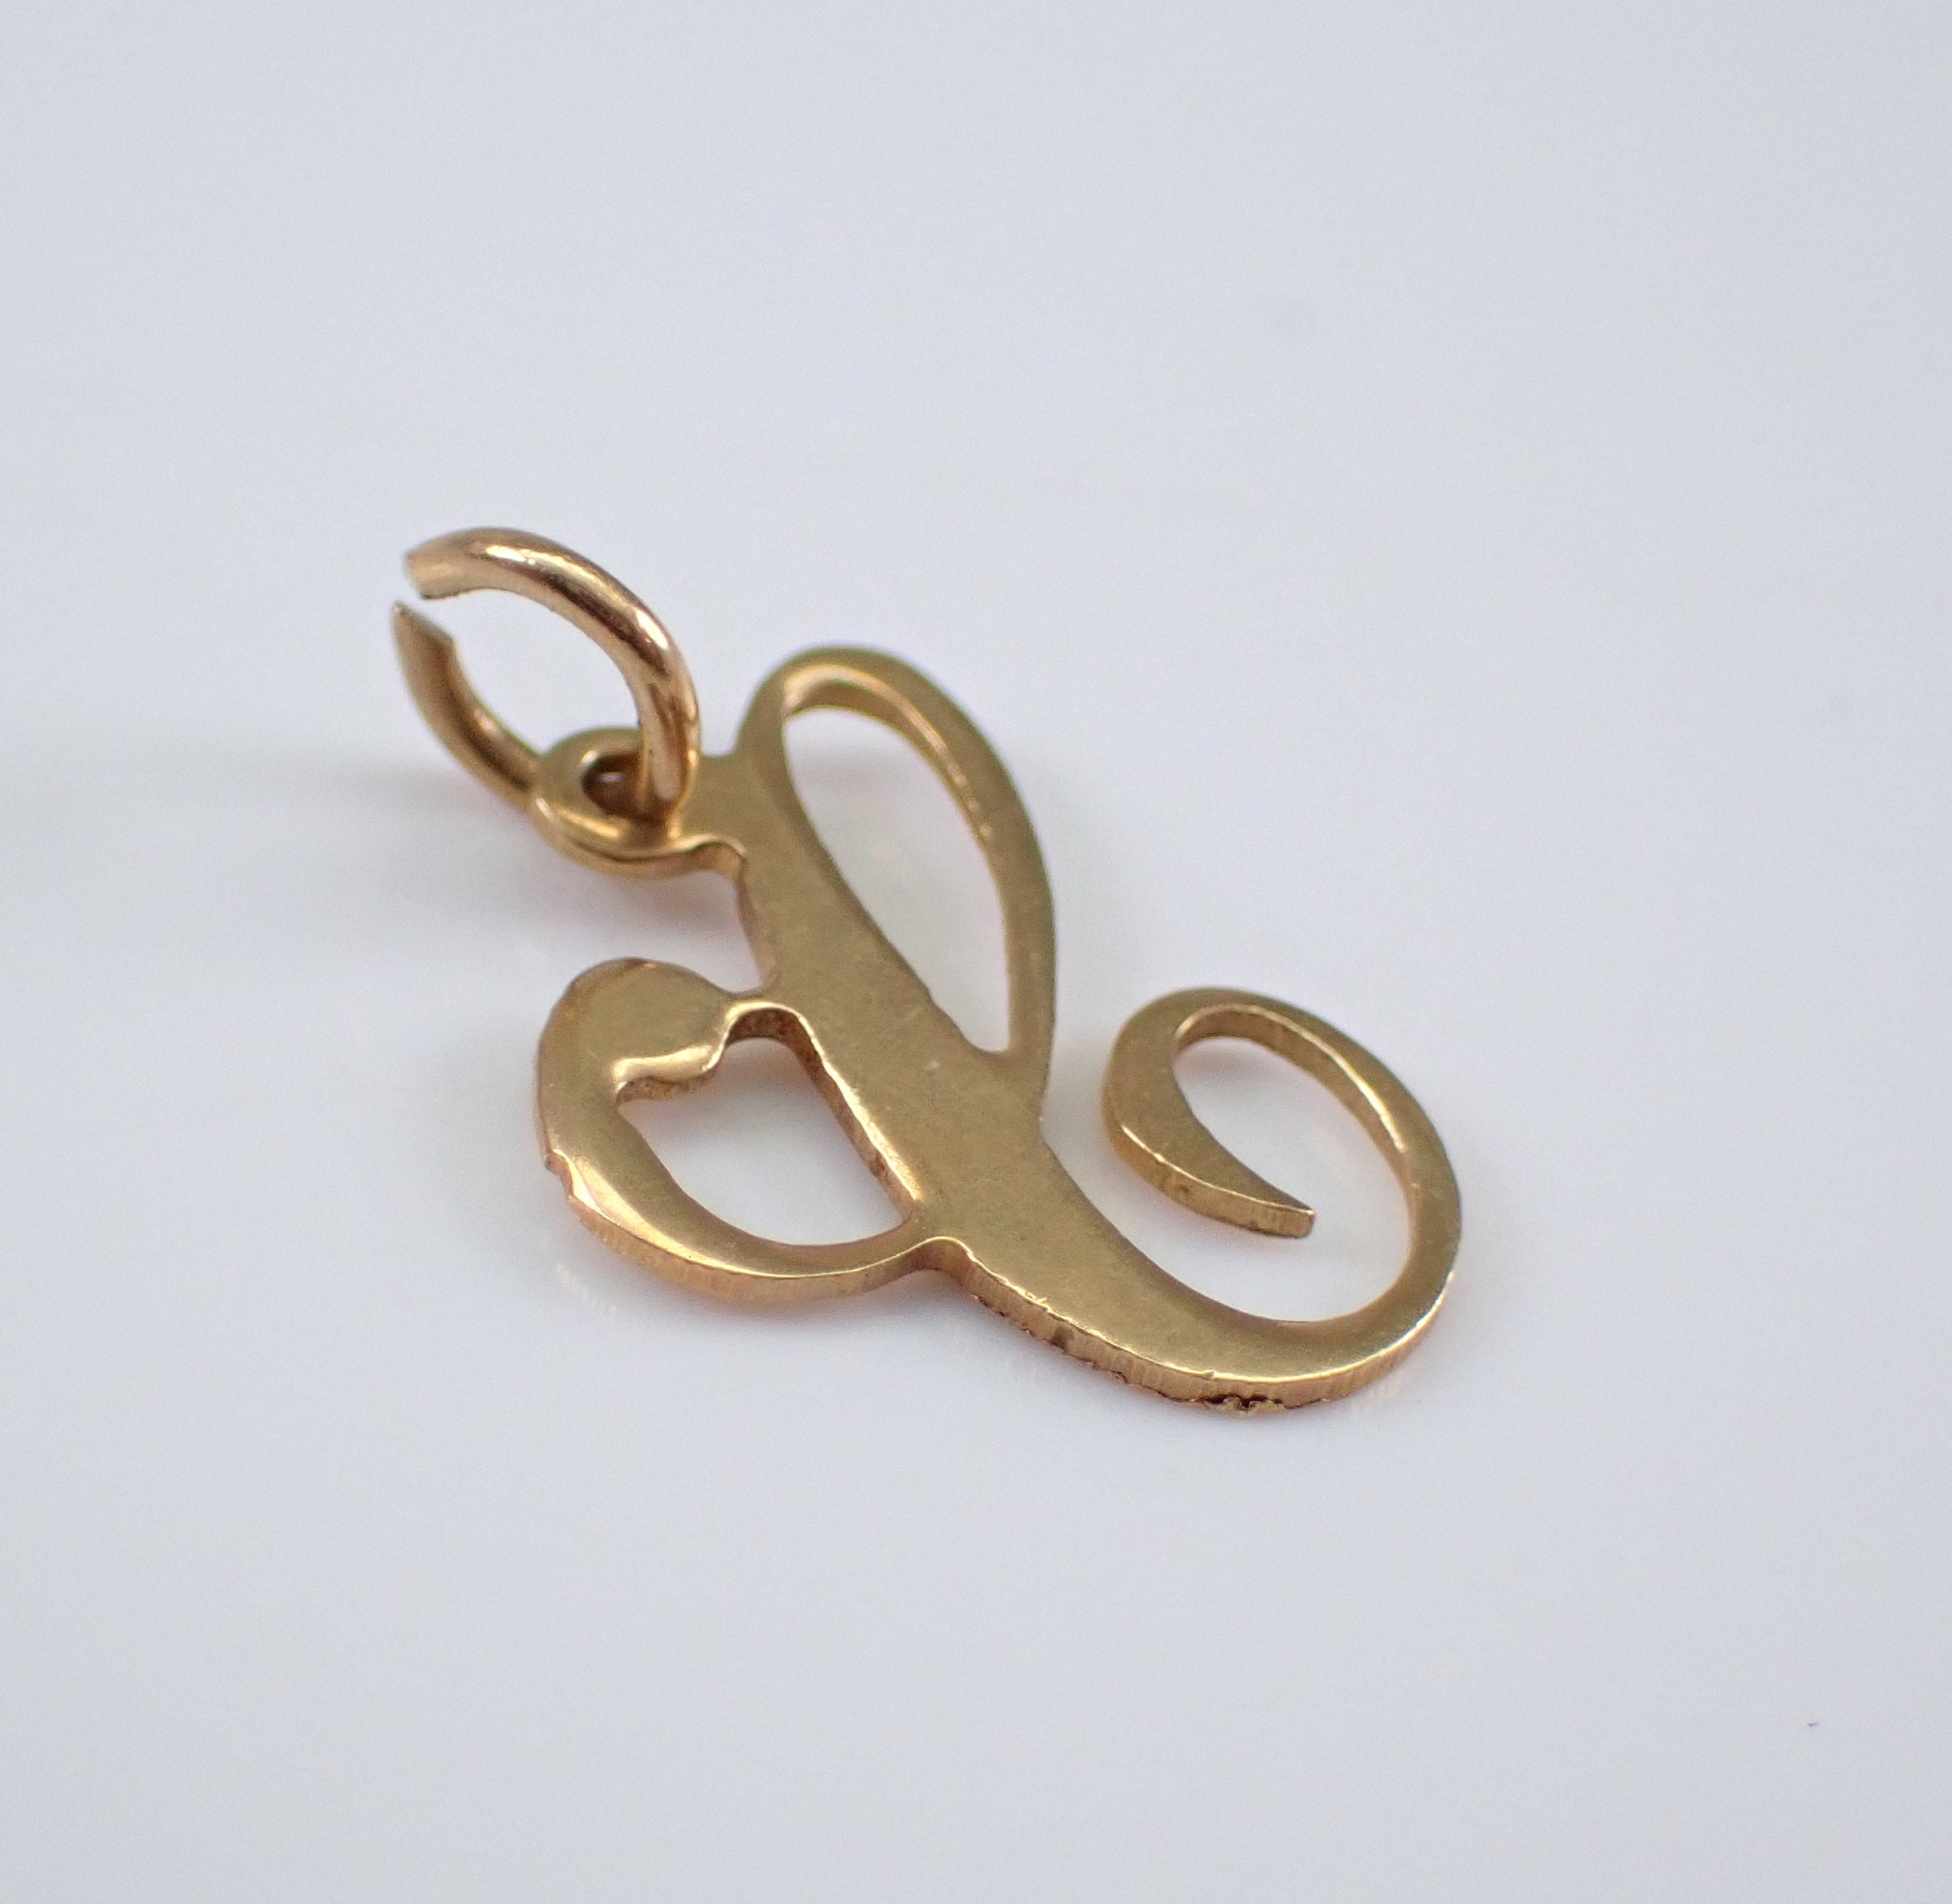 Vintage Initial Letter Charm - The Golden Carrot